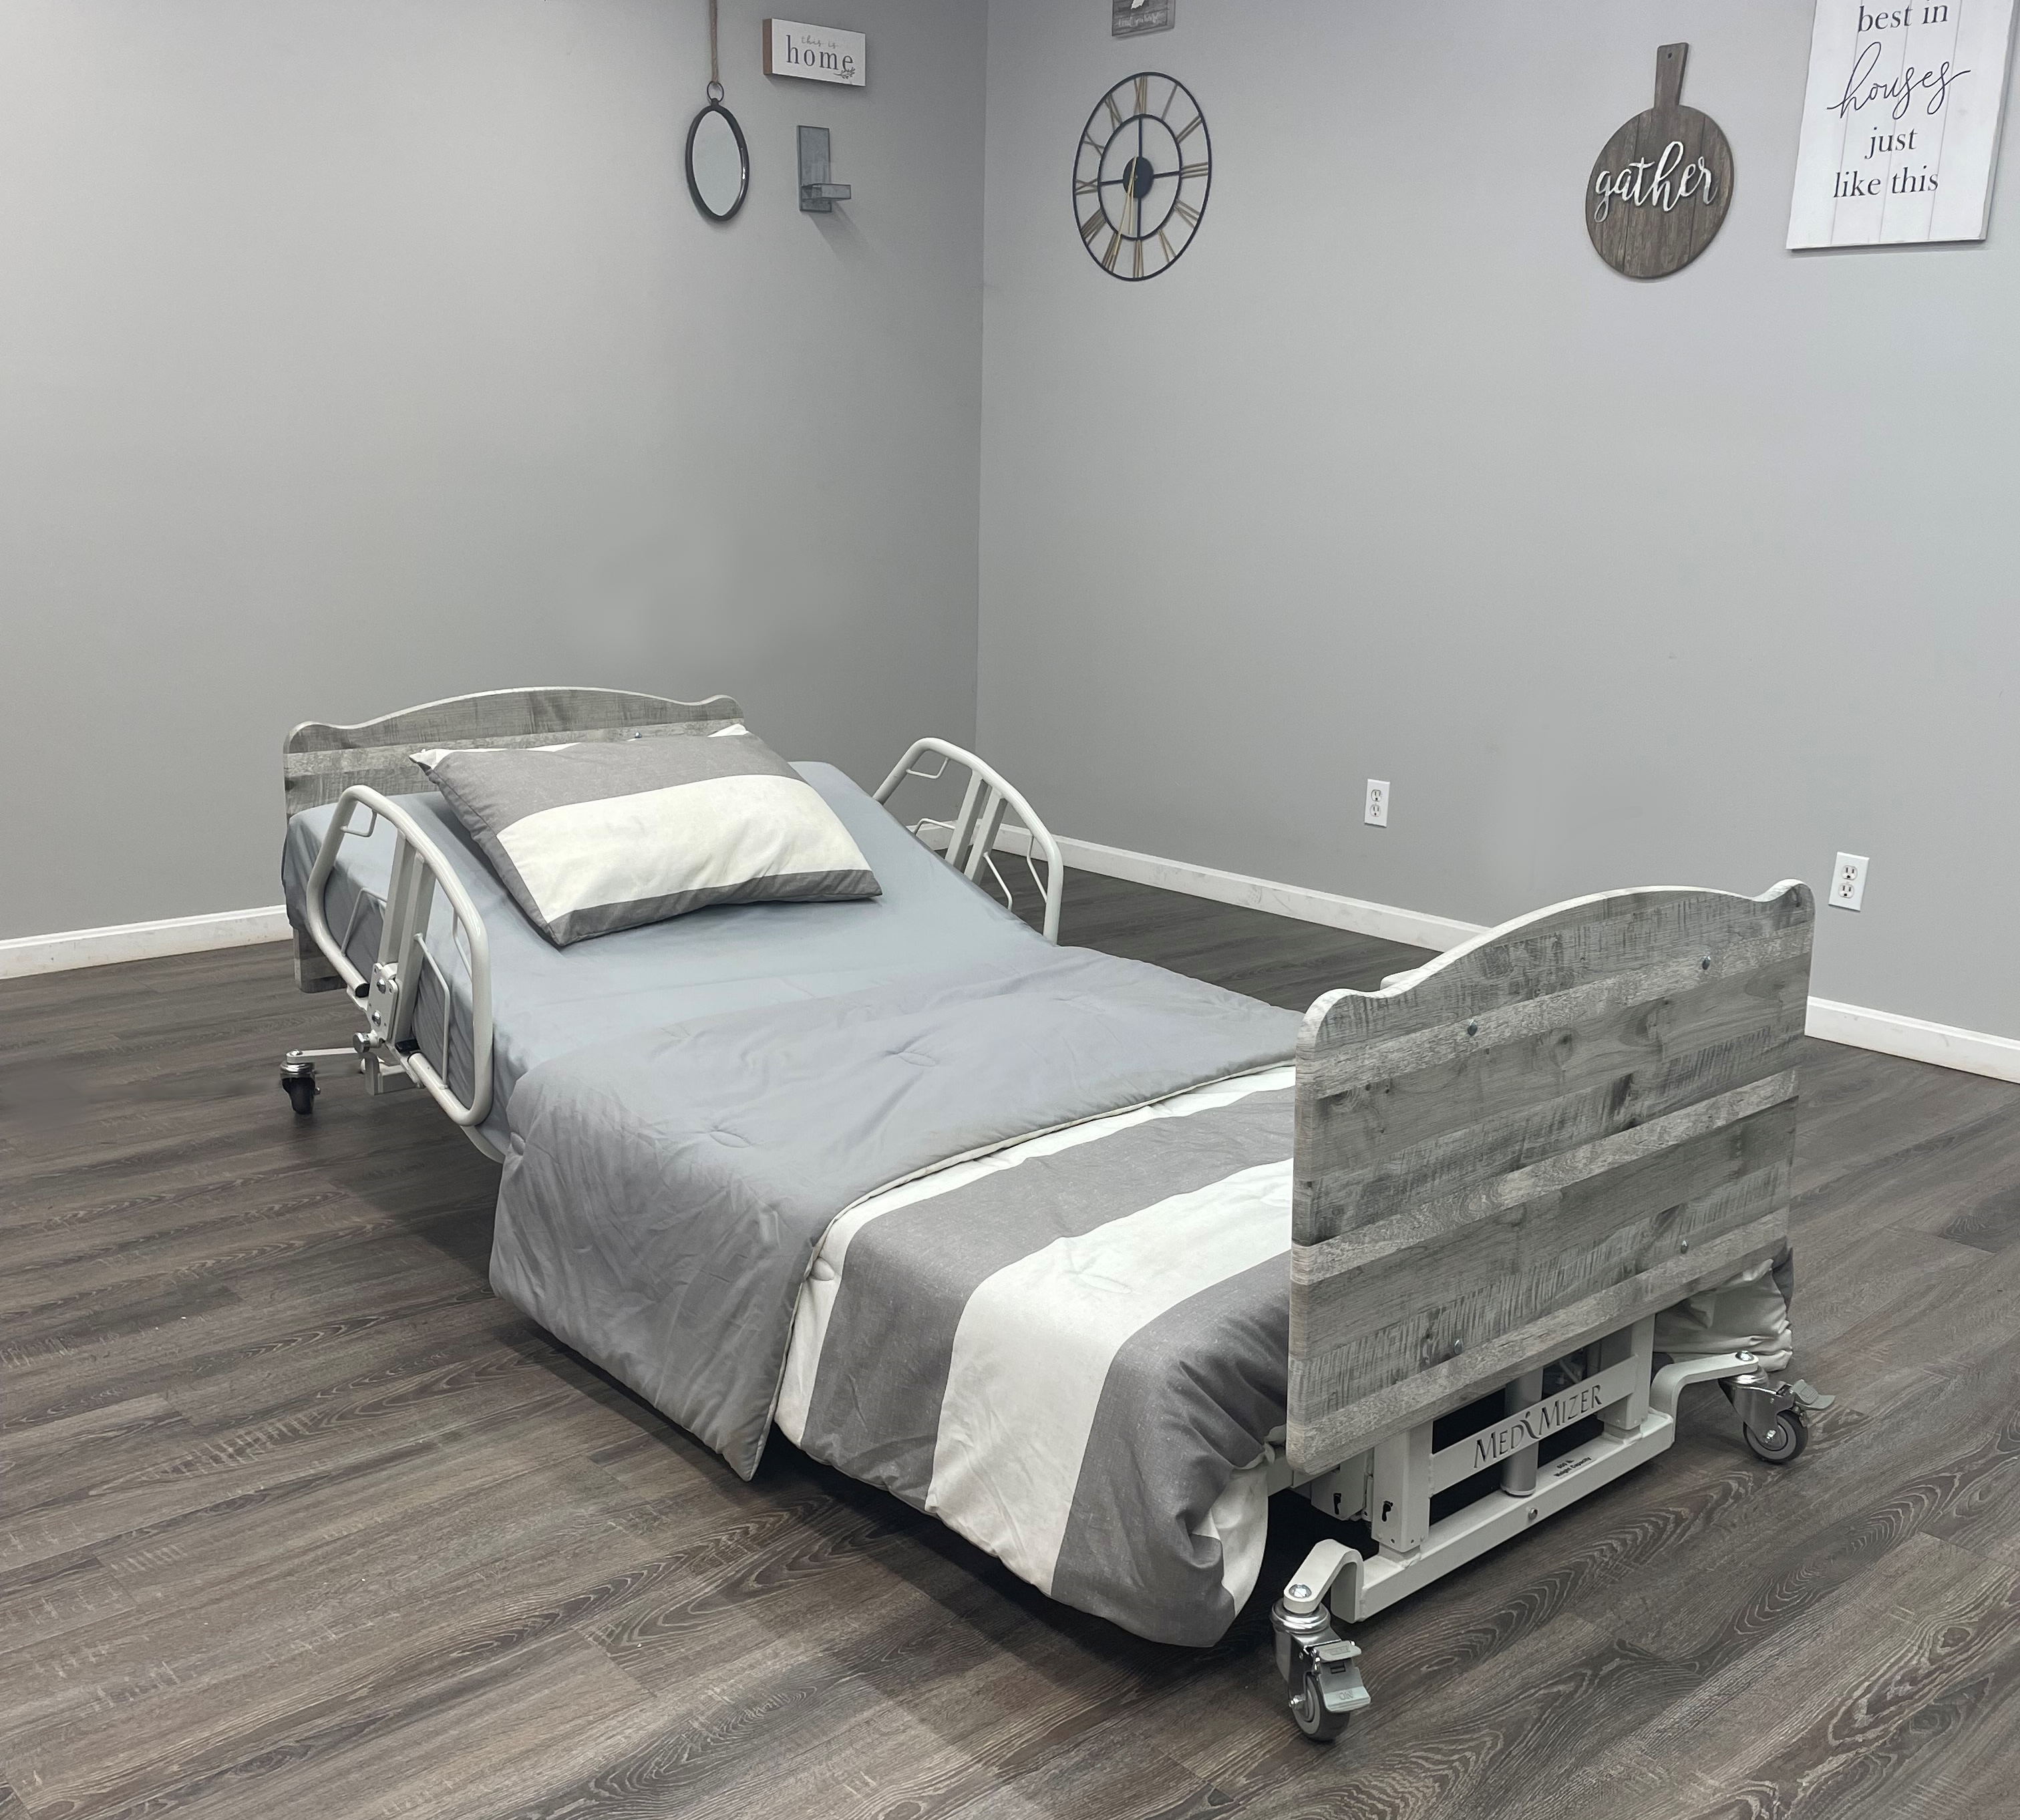 Med-Mizer AllCare COMFORTWIDE Low Hospital Bed and Bariatric Bed  Med-Mizer   